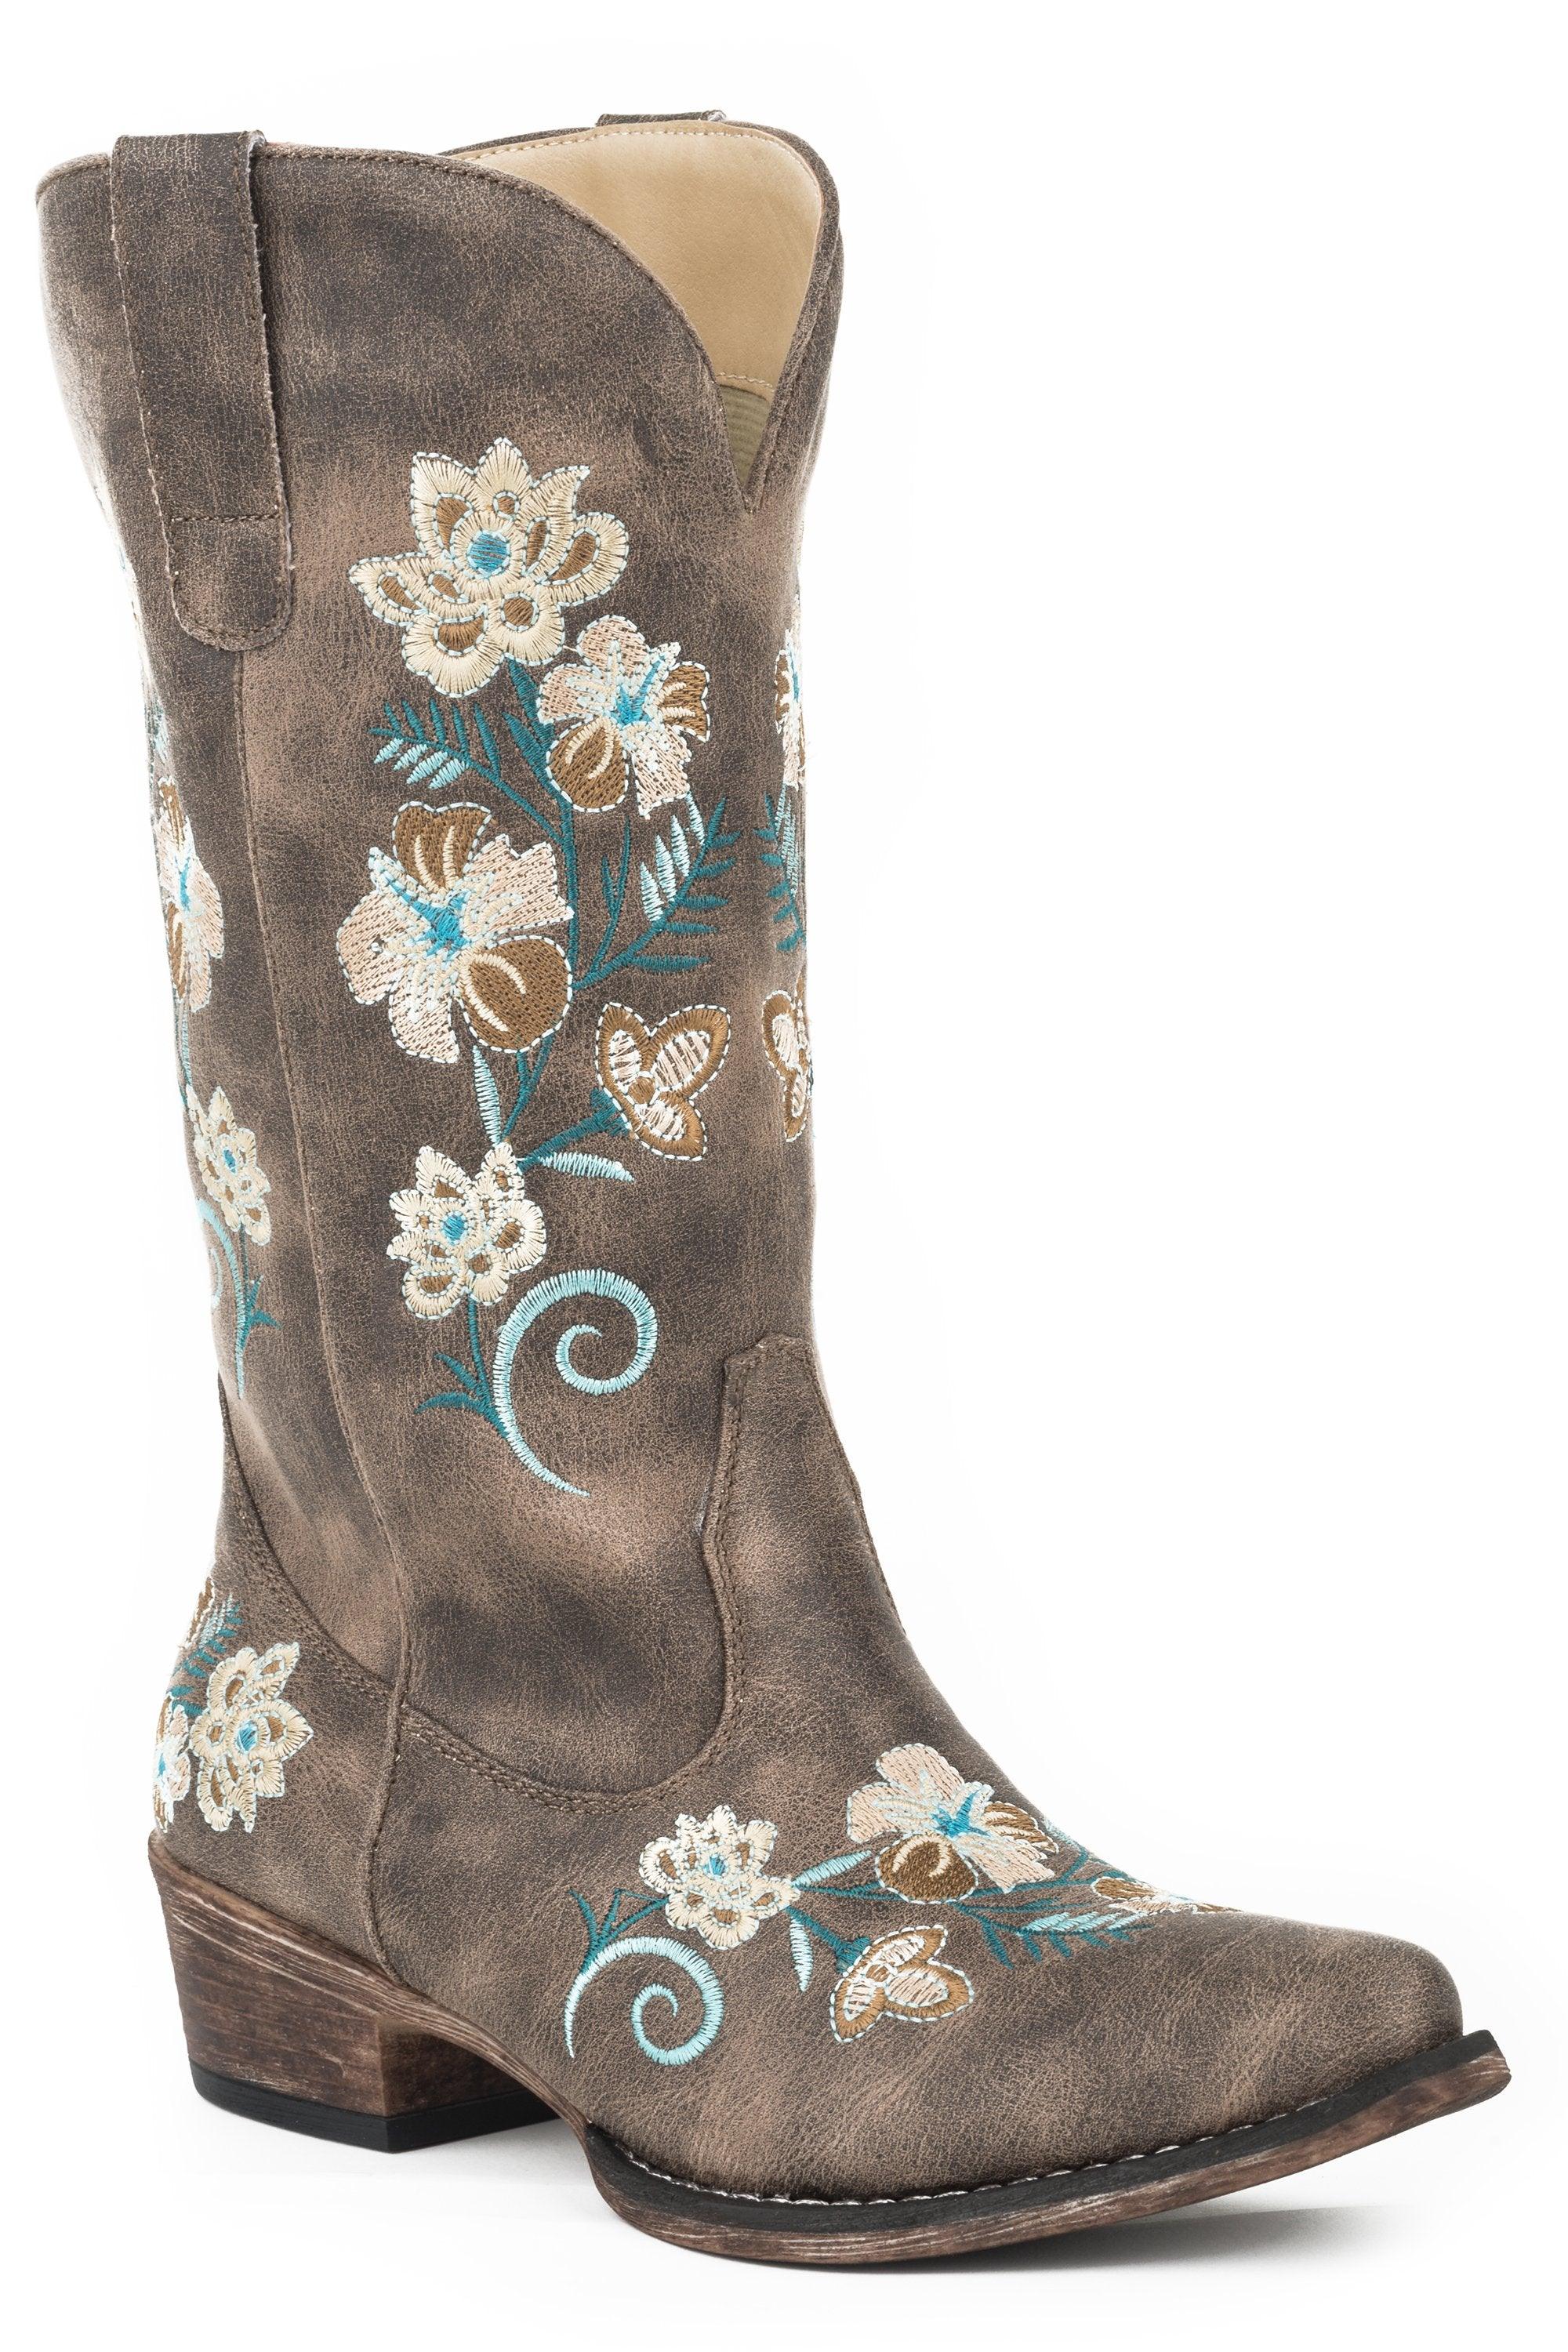 ROPER WOMENS FASHION COWBOY BOOT VINTAGE BROWN FAUX LEATHER WITH ALL OVER FLORAL EMBROIDERY - Flyclothing LLC